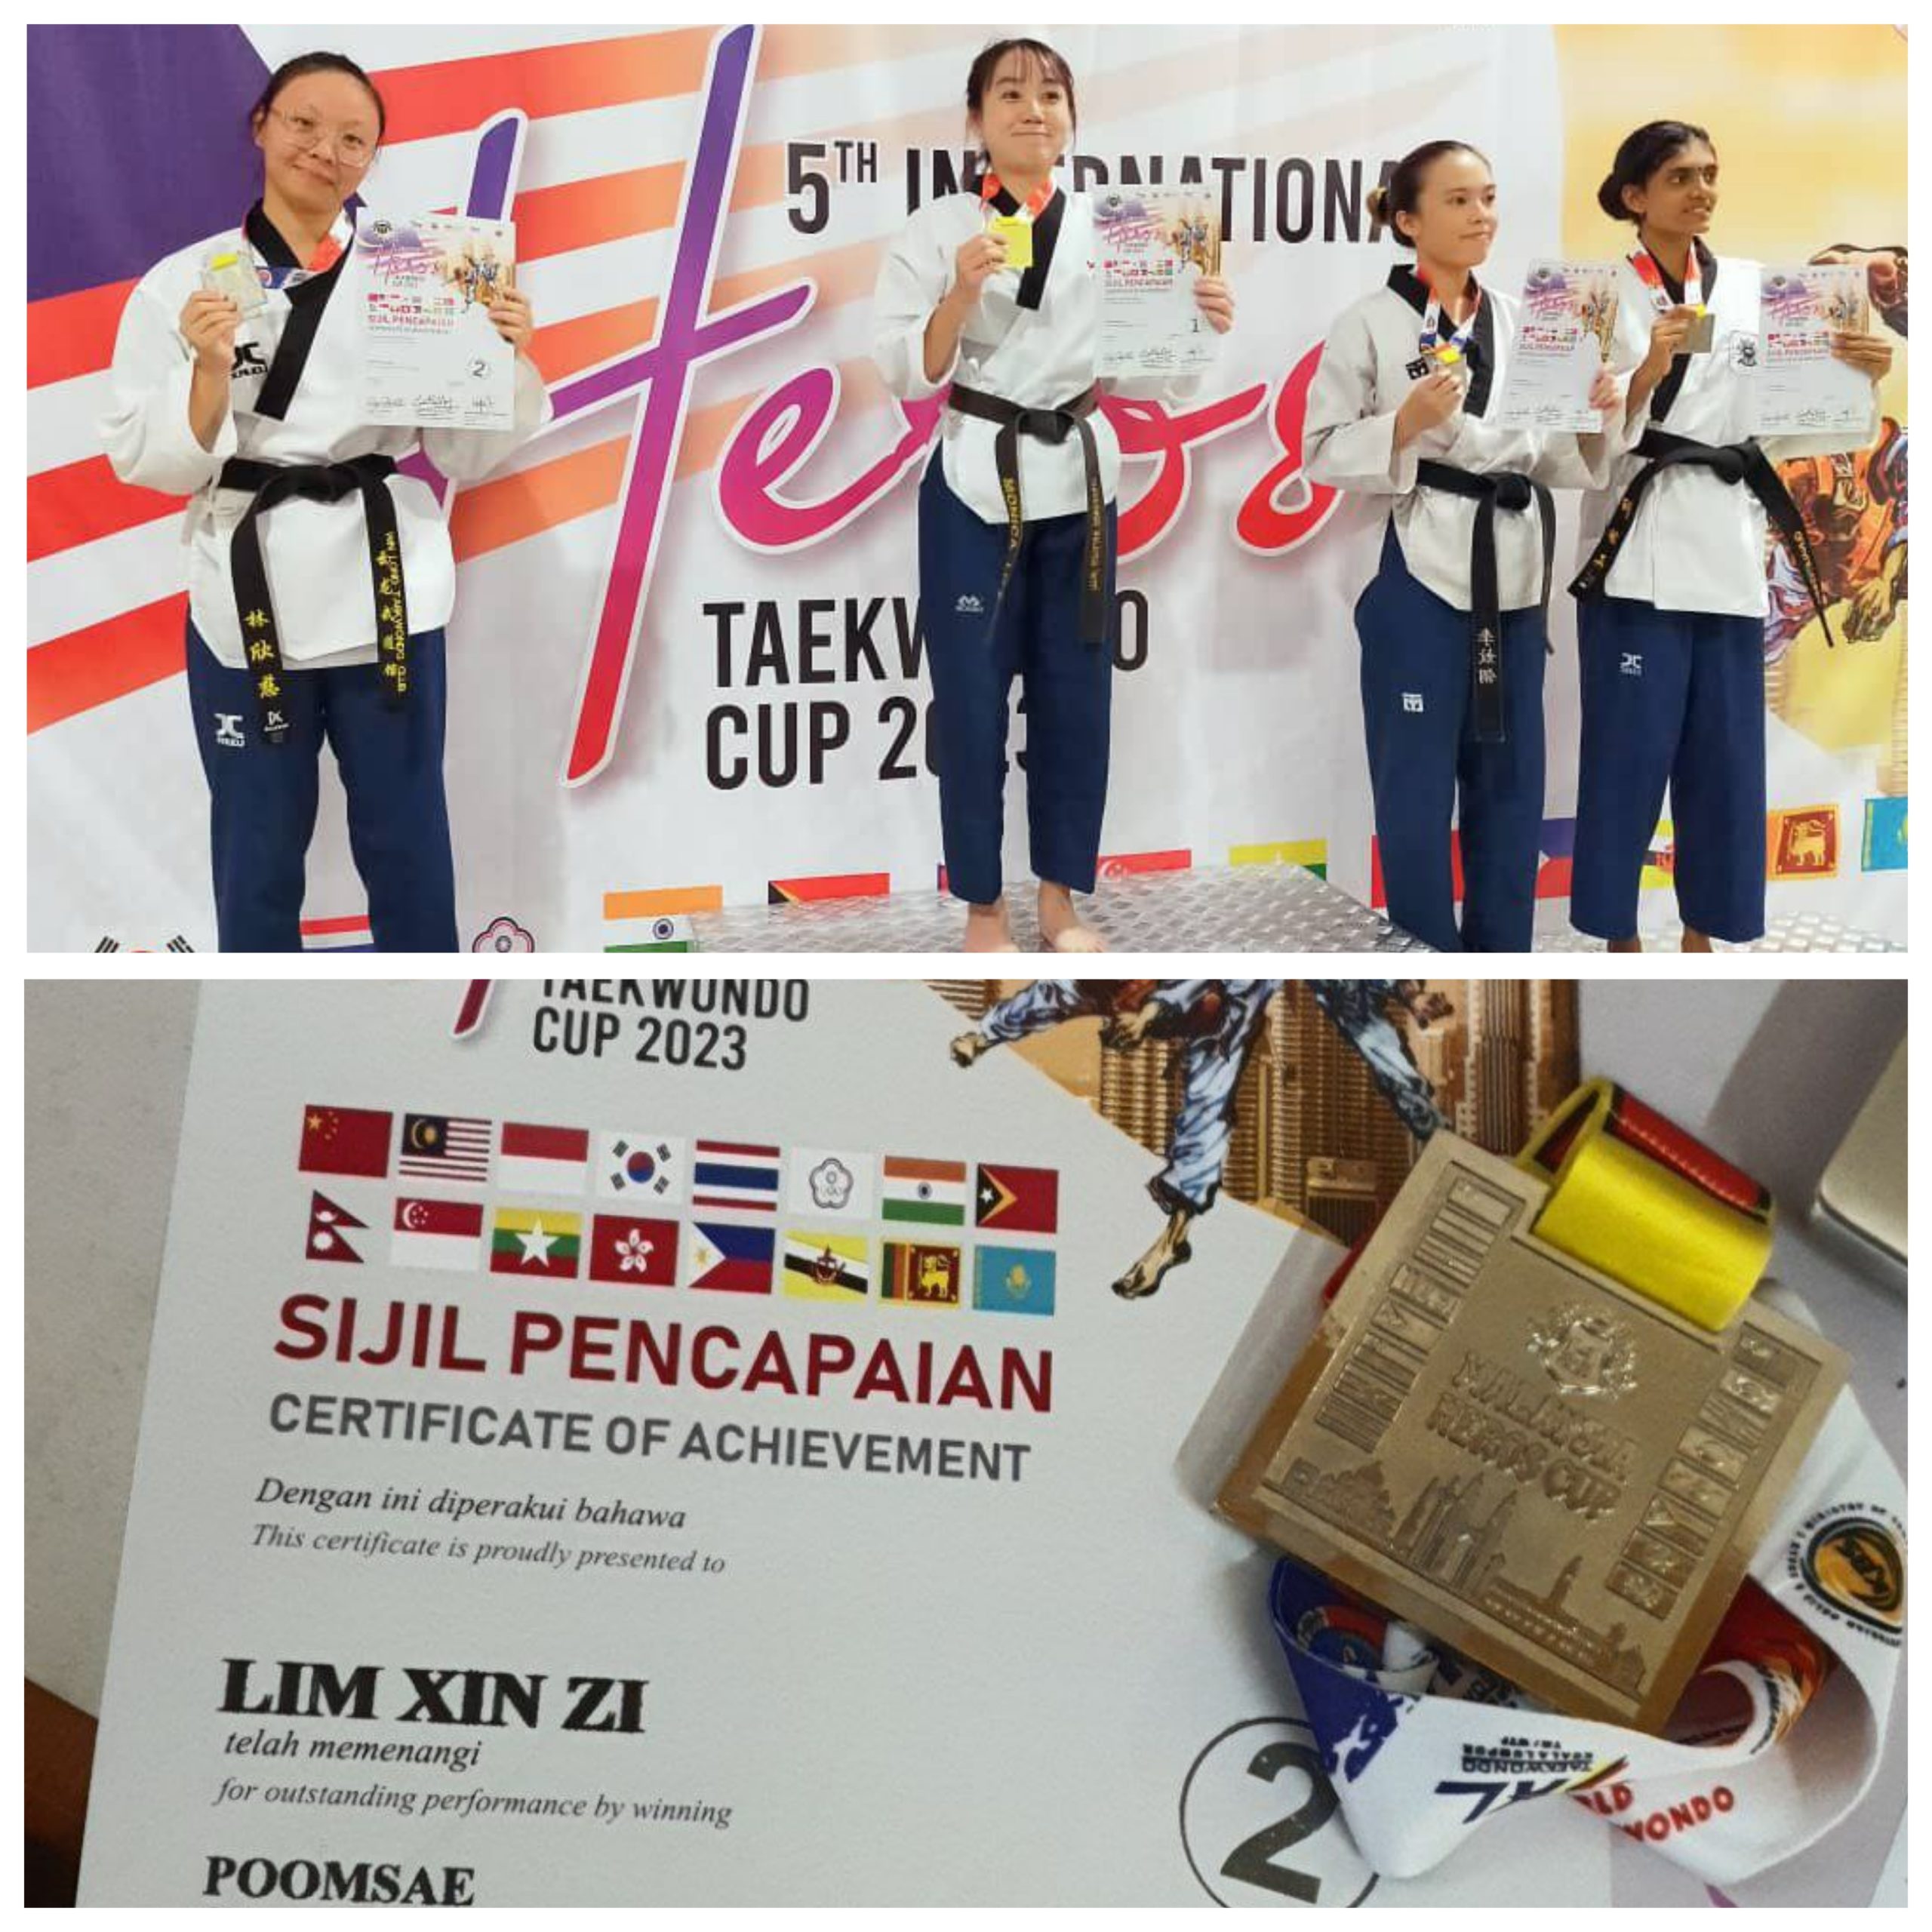 You are currently viewing 5th International Hero’s Taekwando Cup 2023